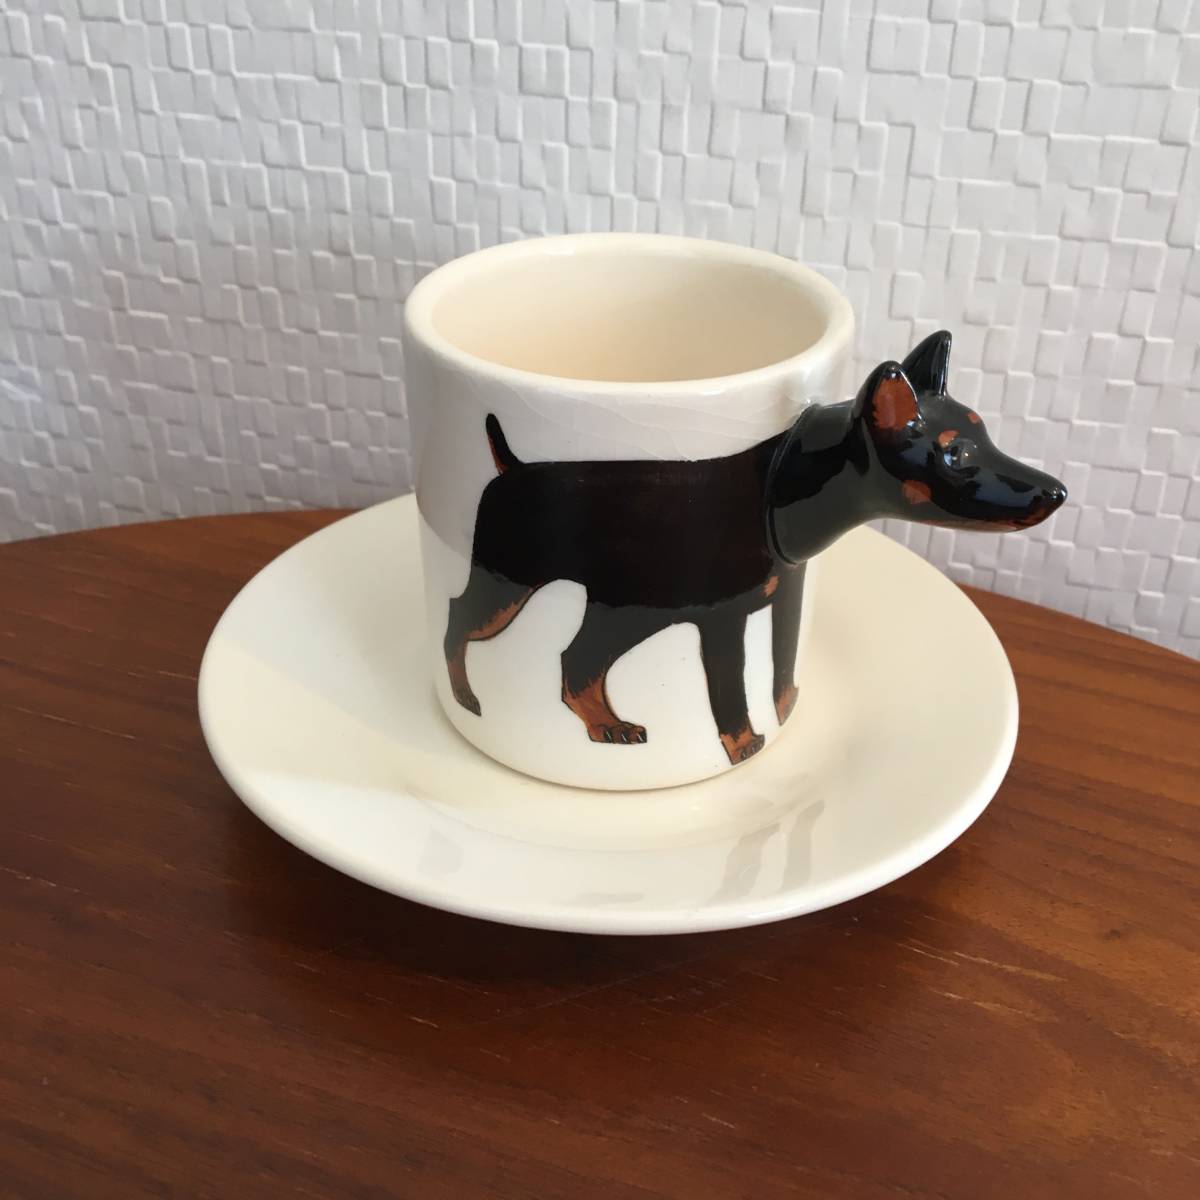 Doberman | Cup & Saucer Set Animal 3D 3D Collection Pottery Handmade Dog Gift Coffee CUP Espresso (New) (Buy Now), tea utensils, Cup and saucer, Coffee cup